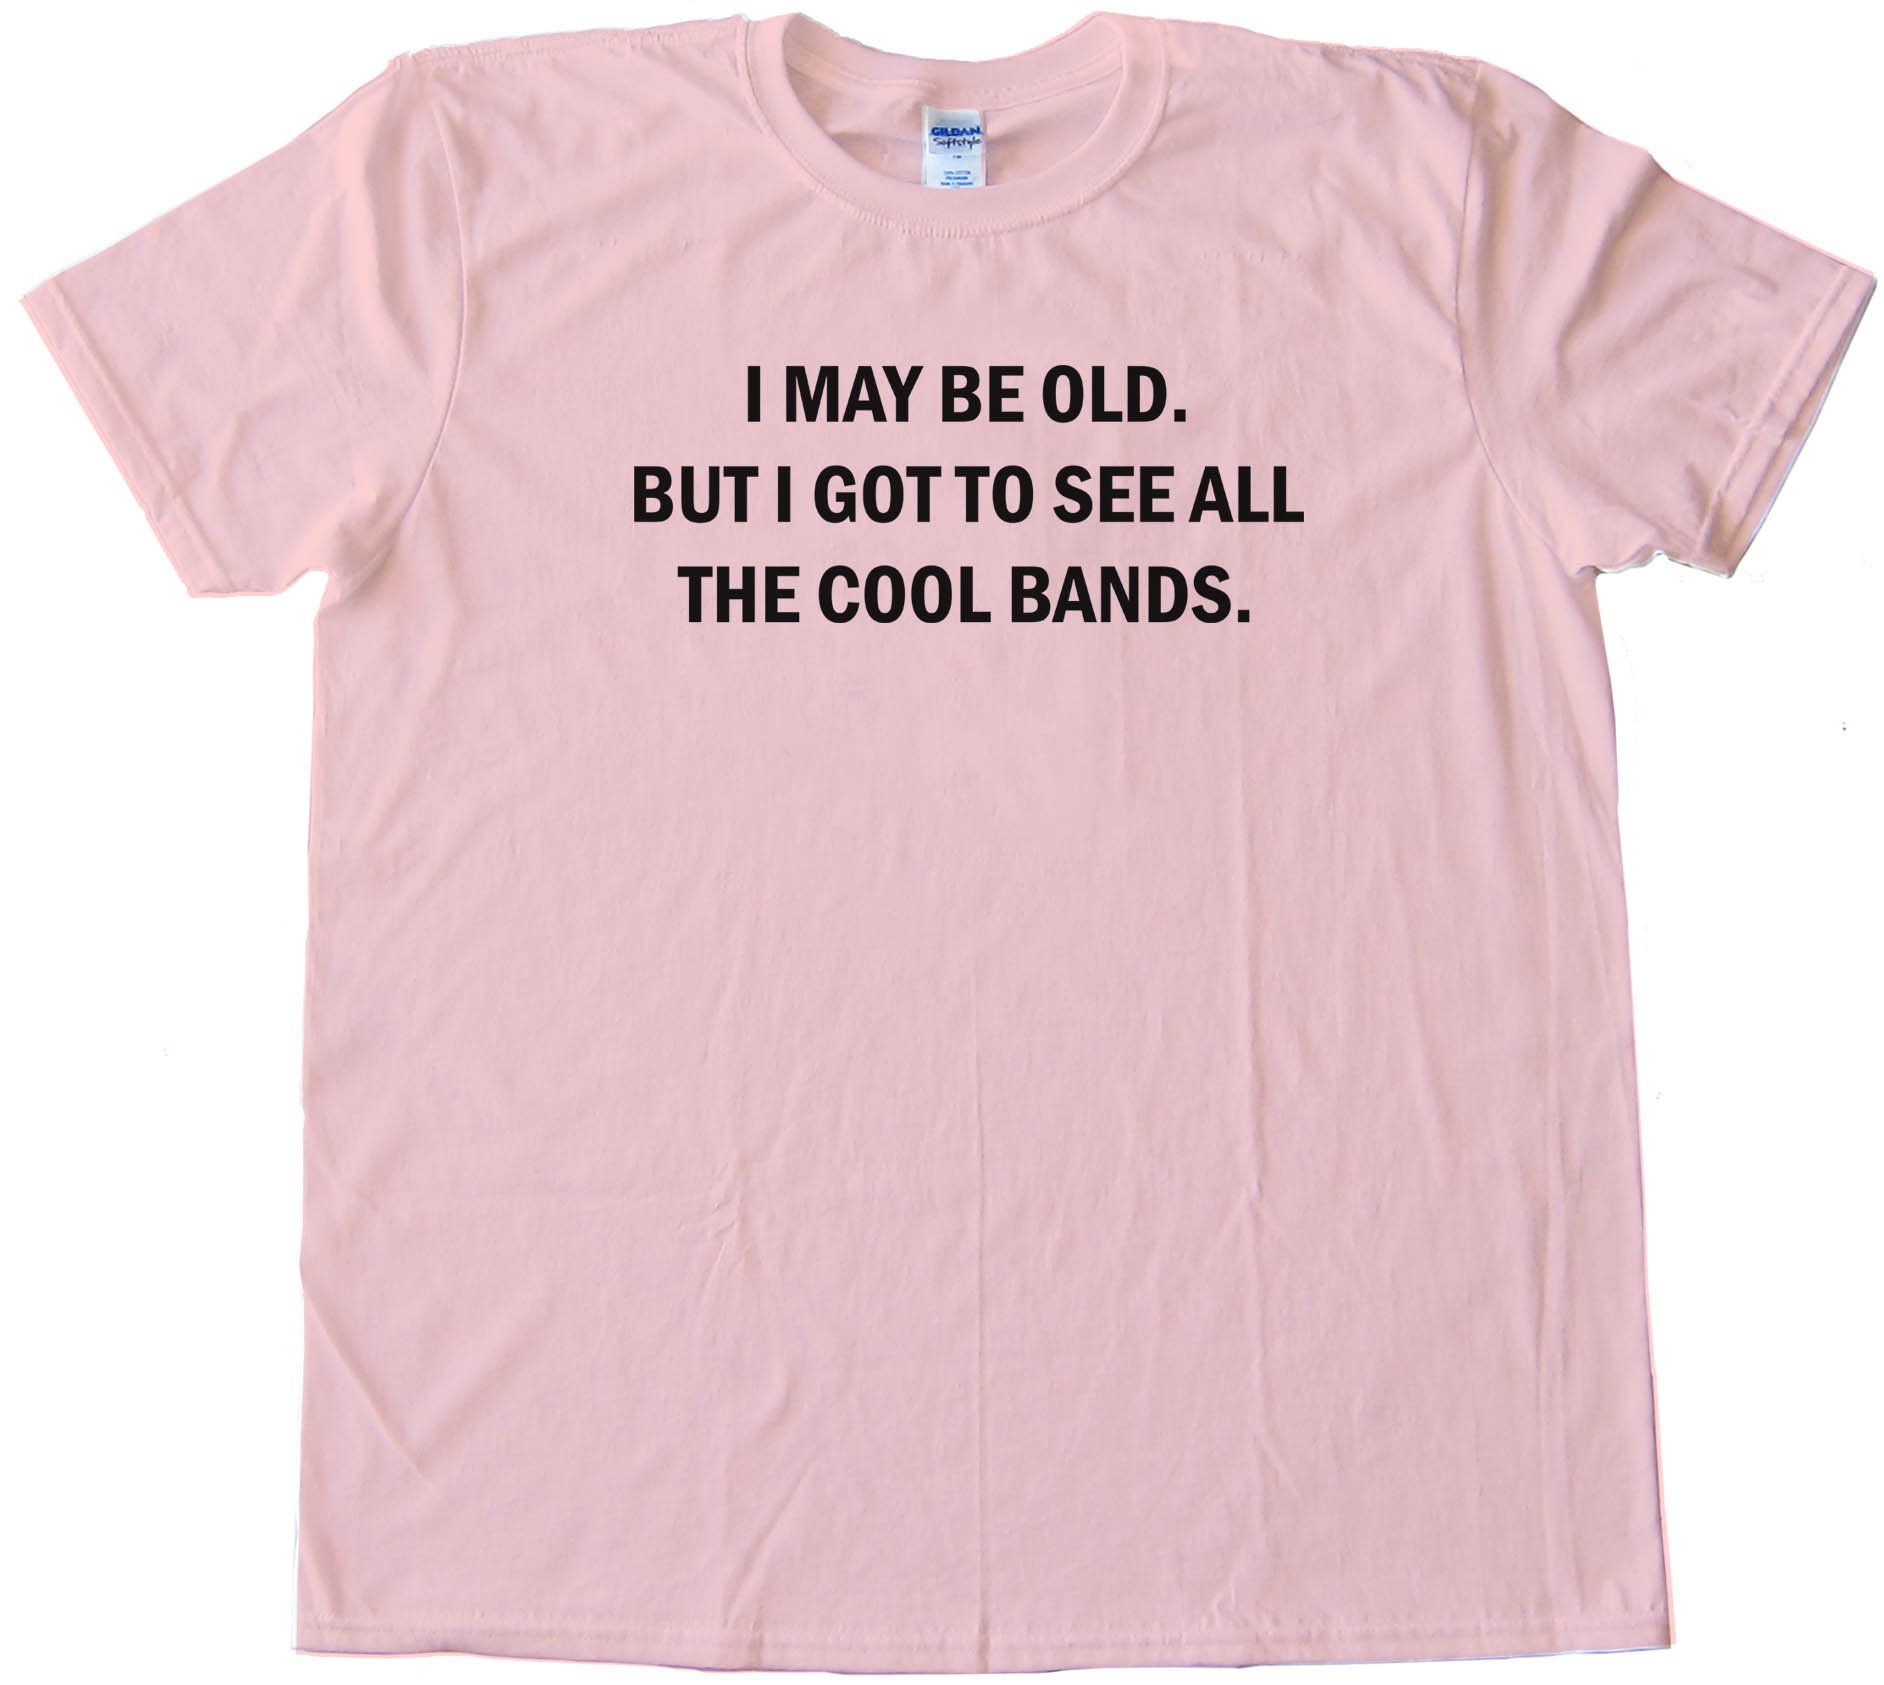 I May Be Old But I Got To See All The Cool Bands - Tee Shirt